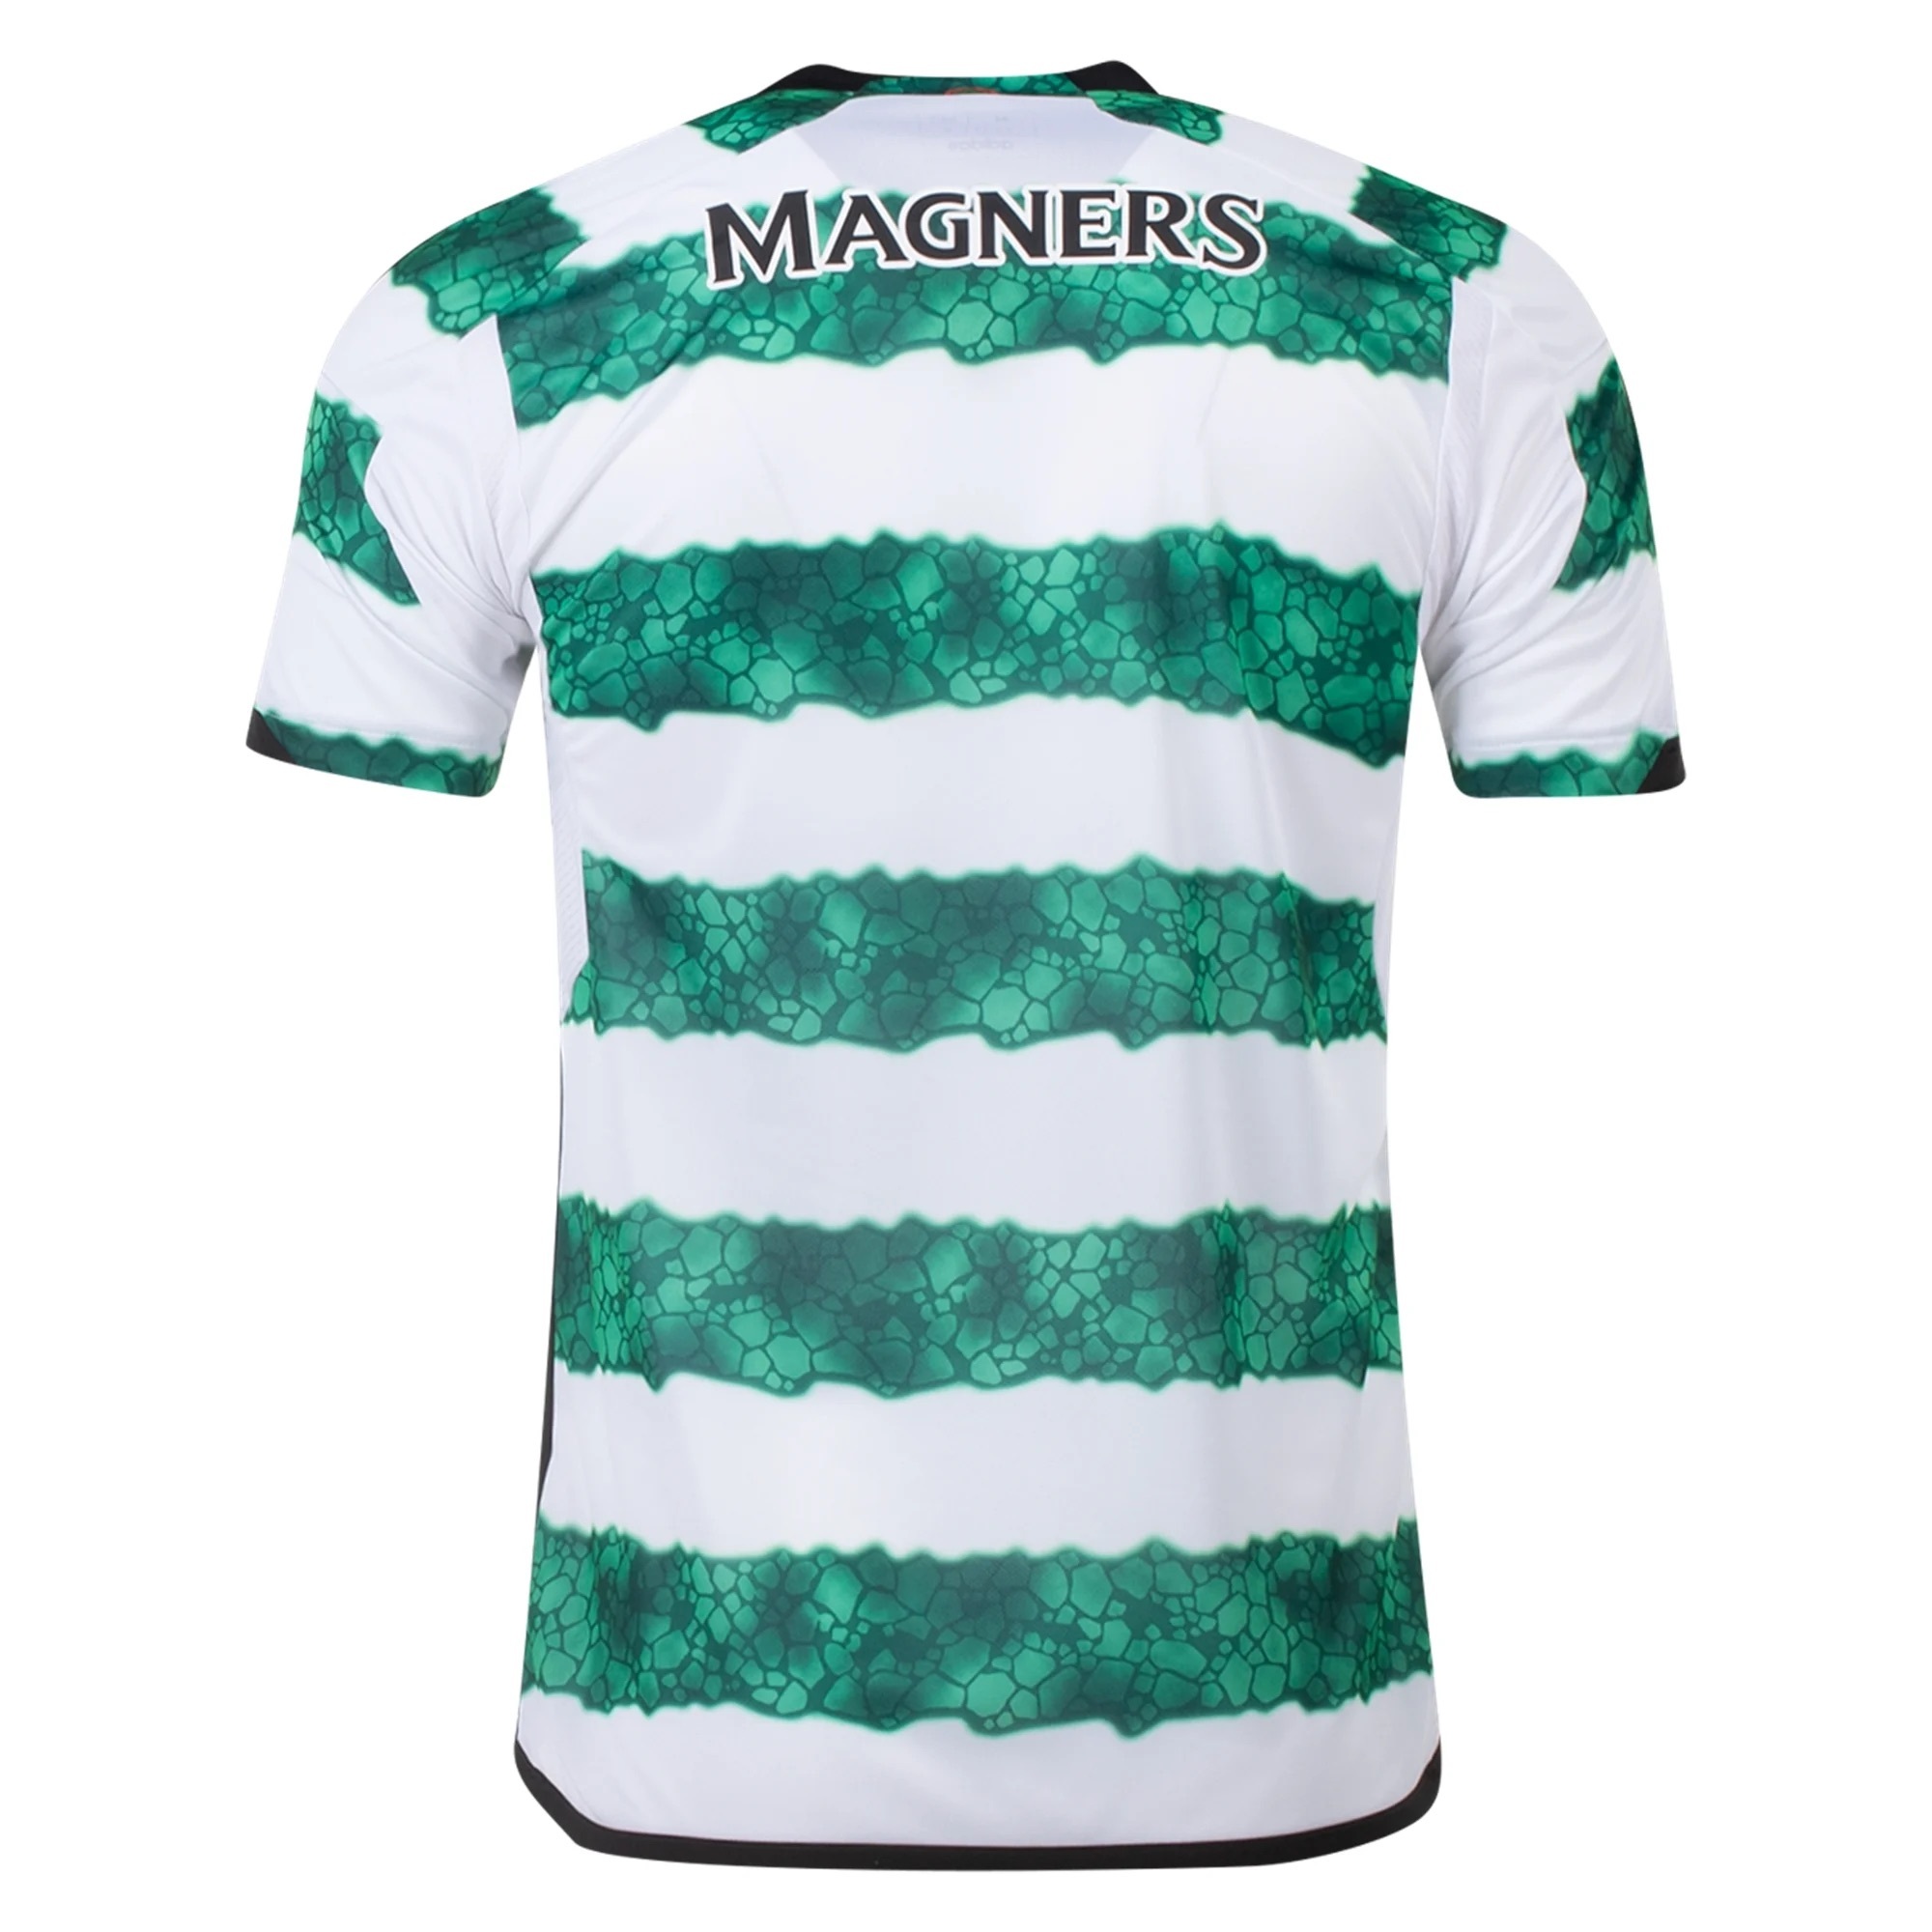 23/24 Celtic Home Jersey